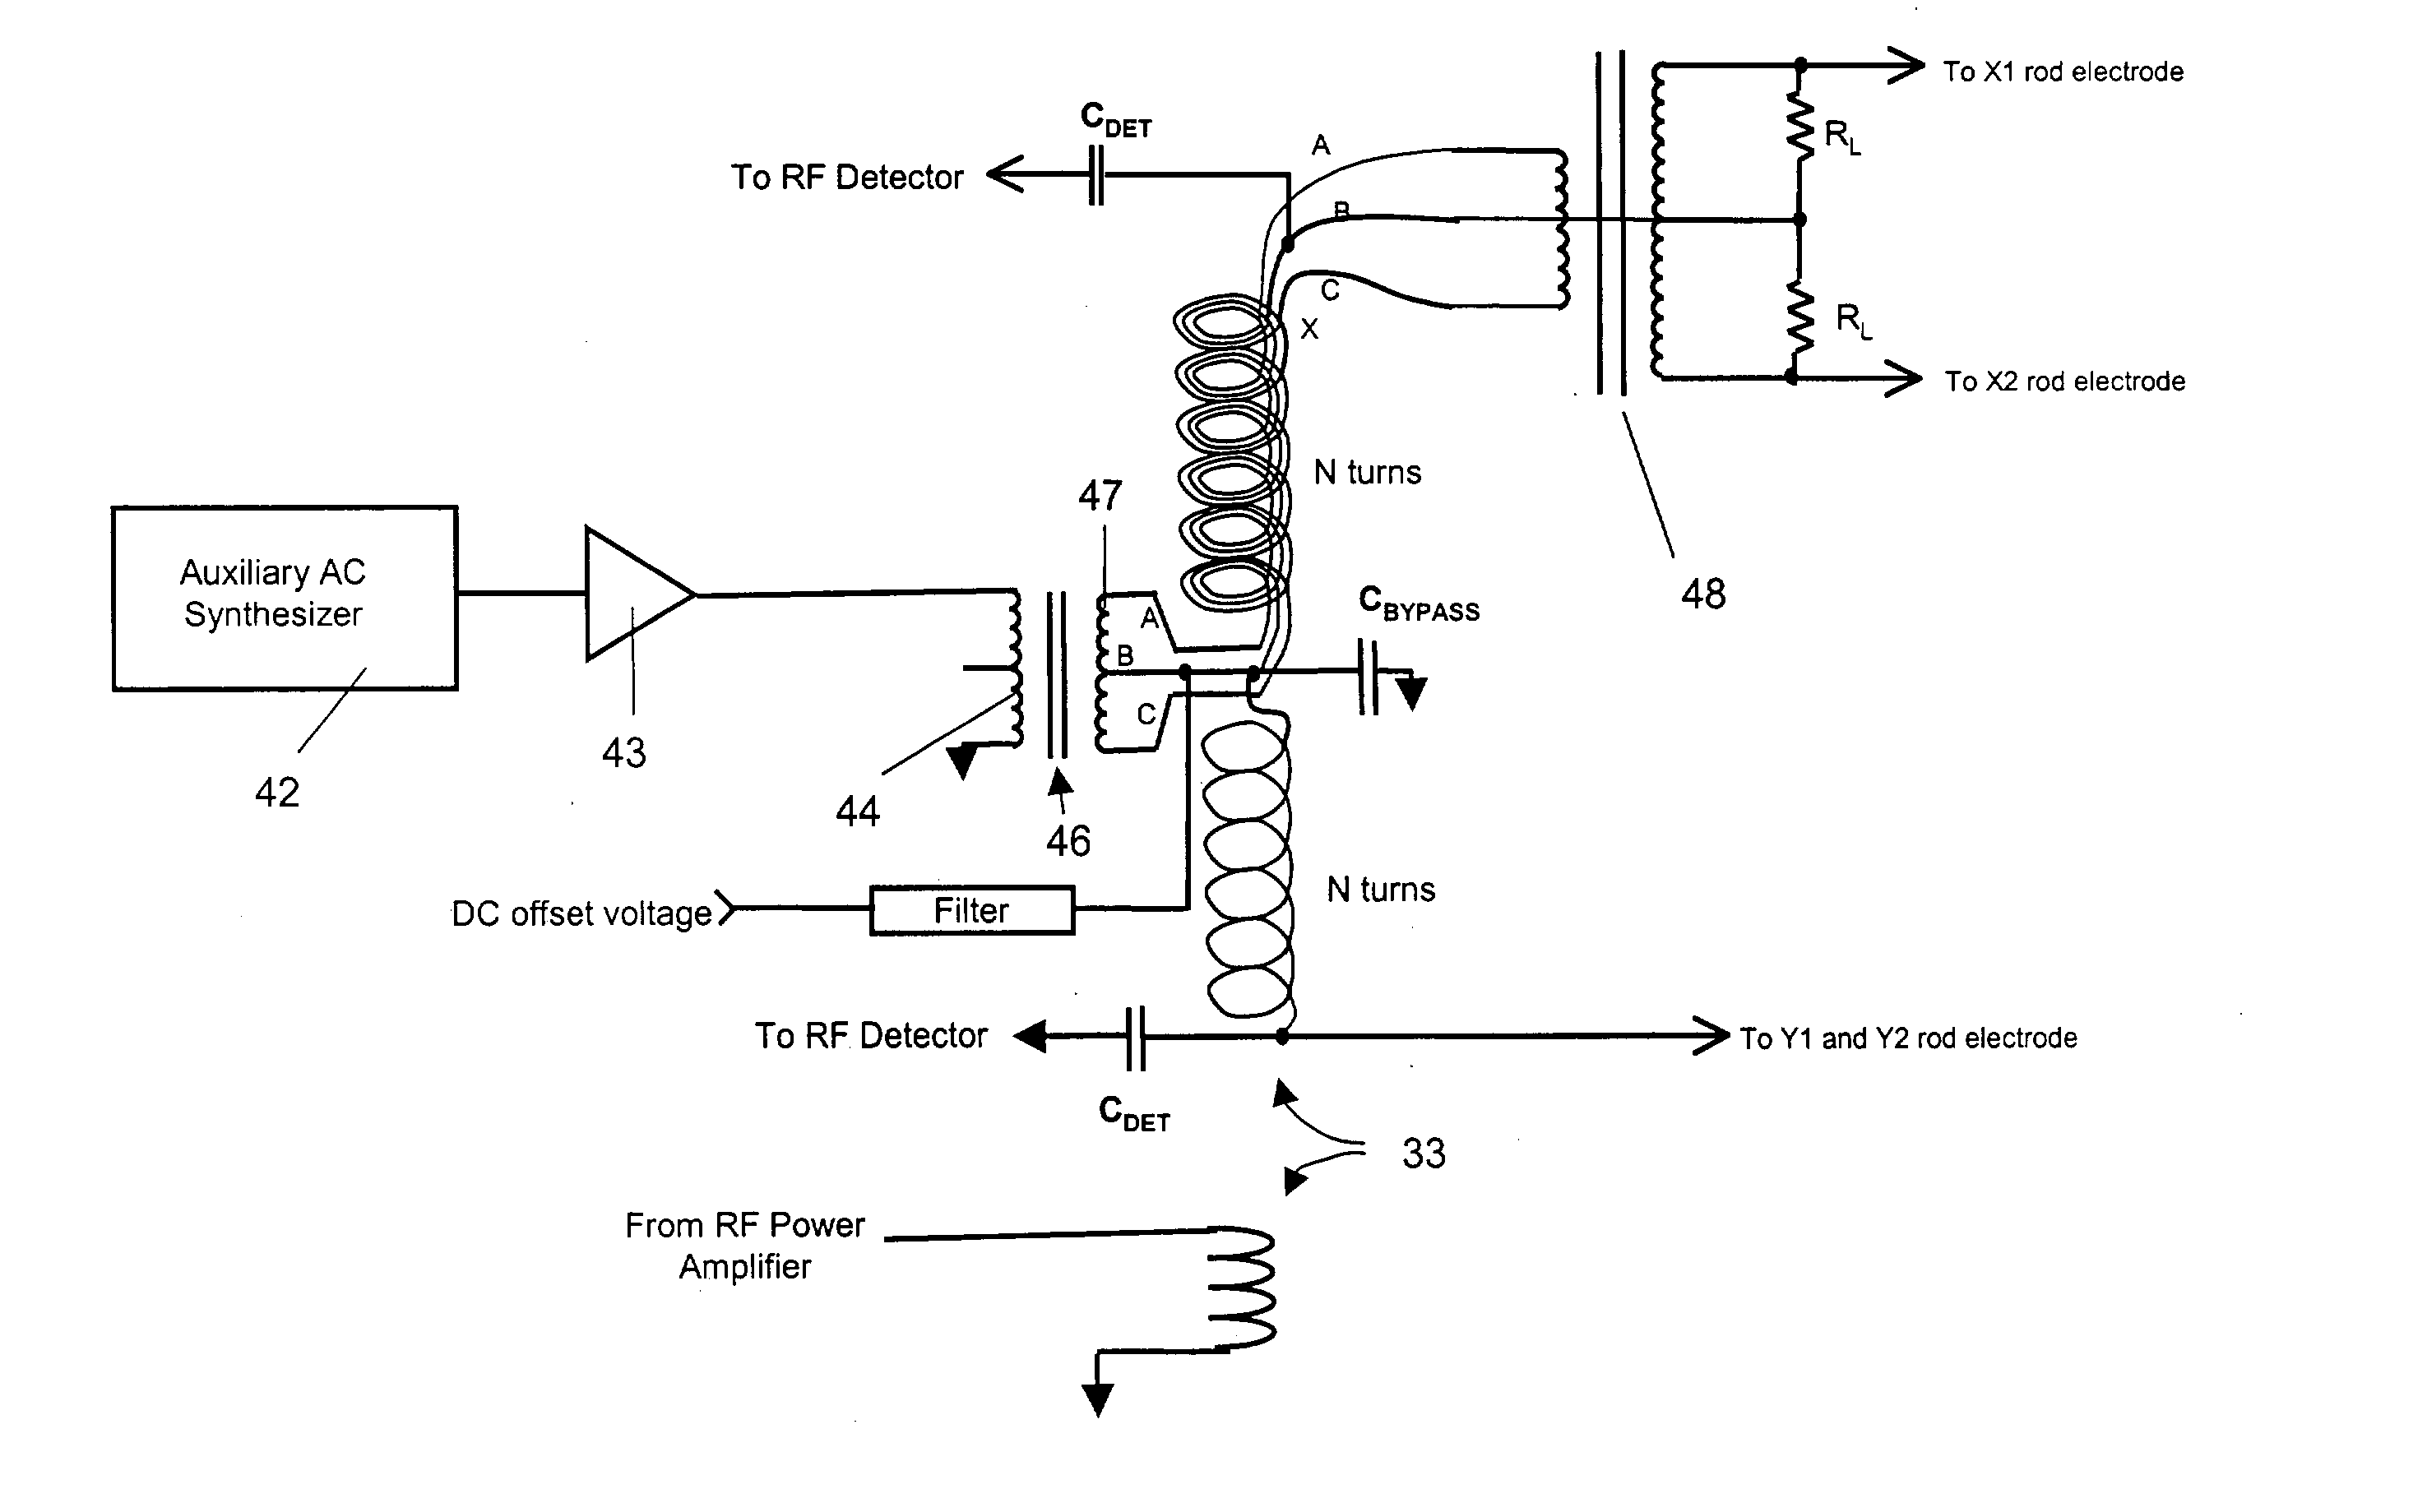 Circuit for applying suplementary voltages to RF multipole devices